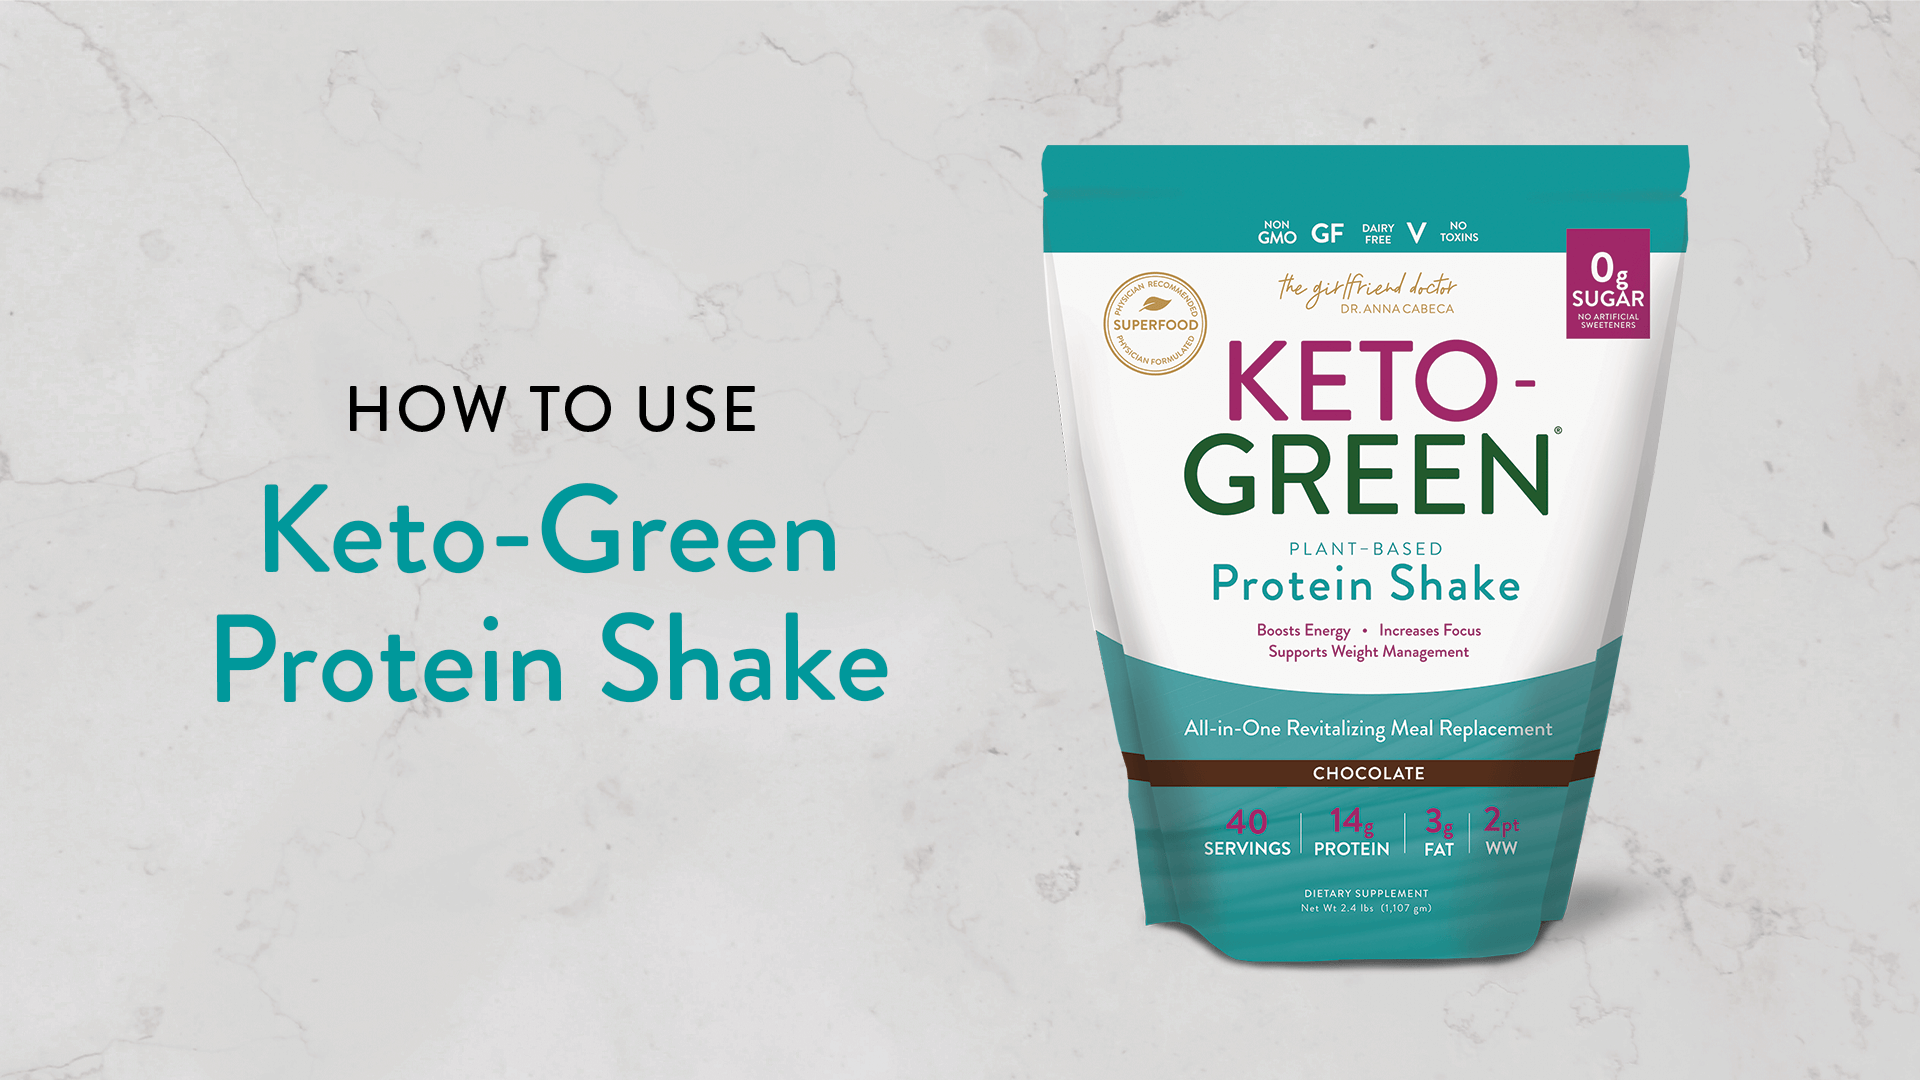 Load video: Dr. Anna Cabeca talks about how to use Keto-Green Protein Shake